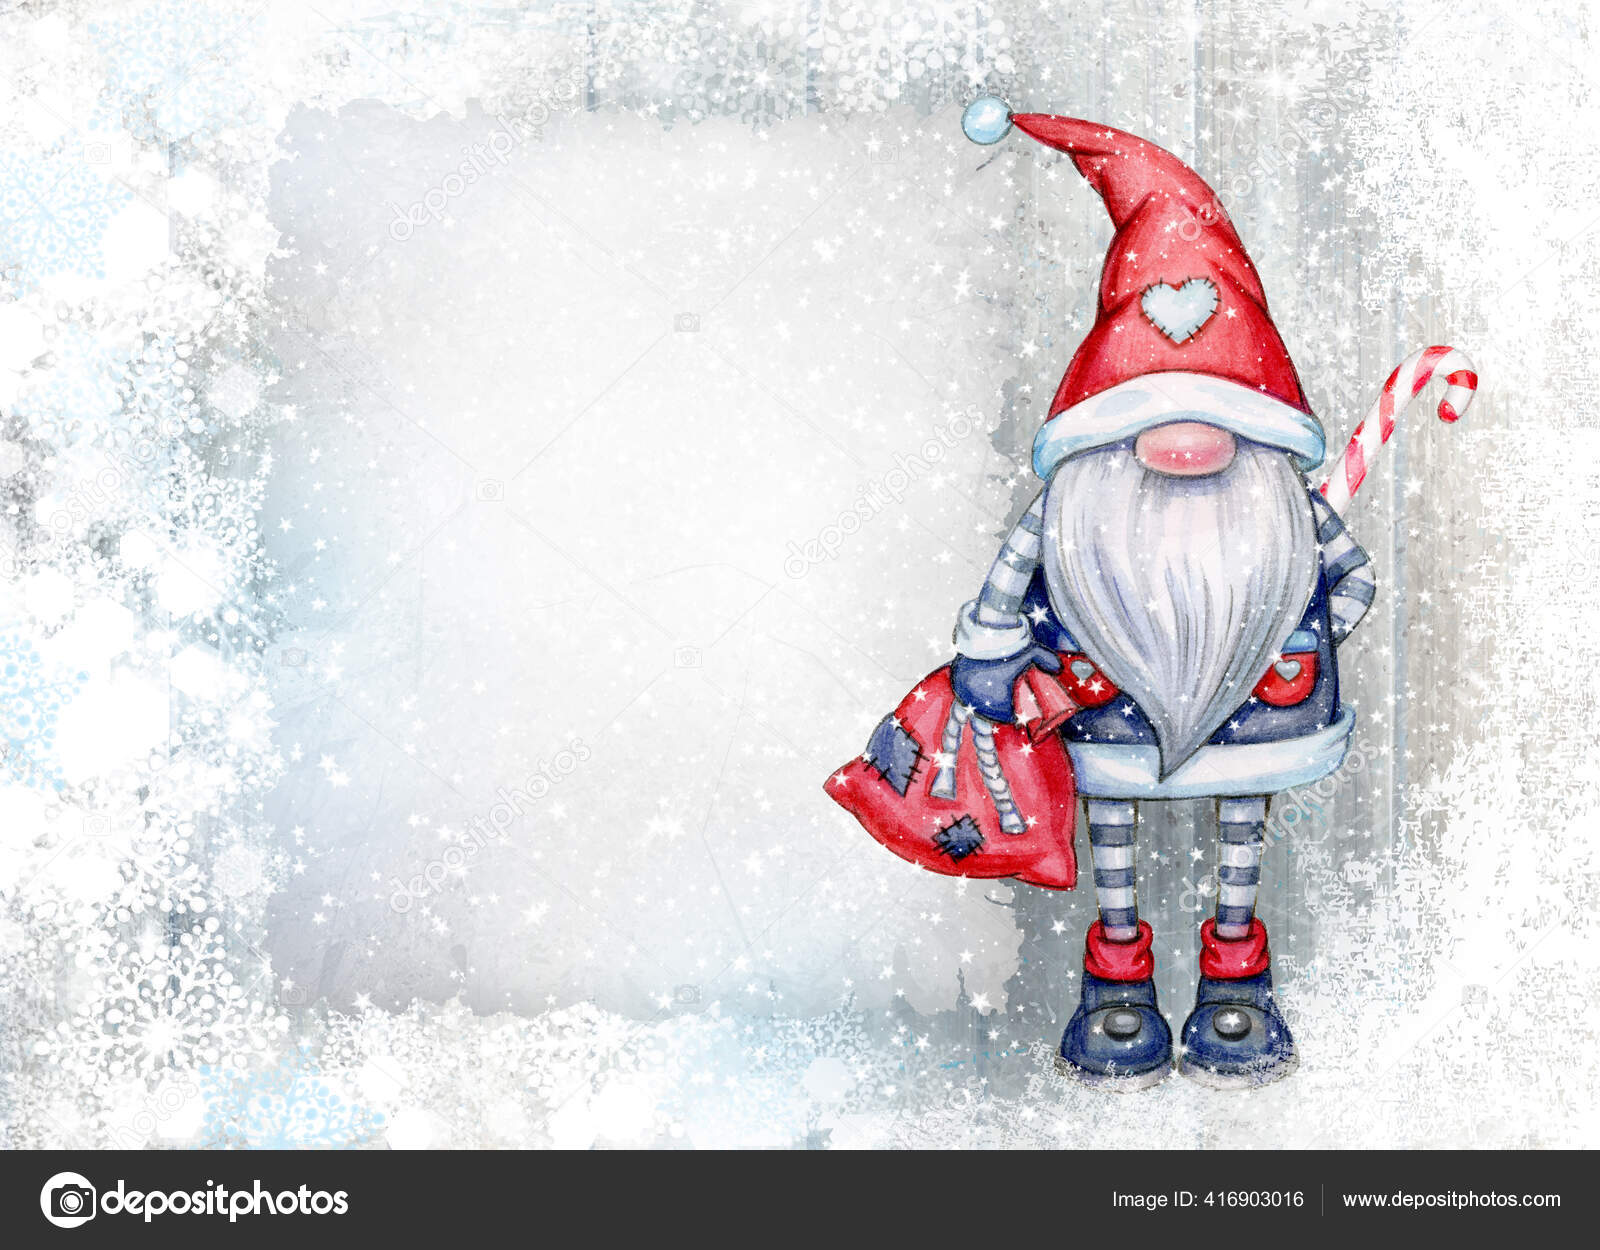 3760 Christmas gnome Vector Images  Depositphotos